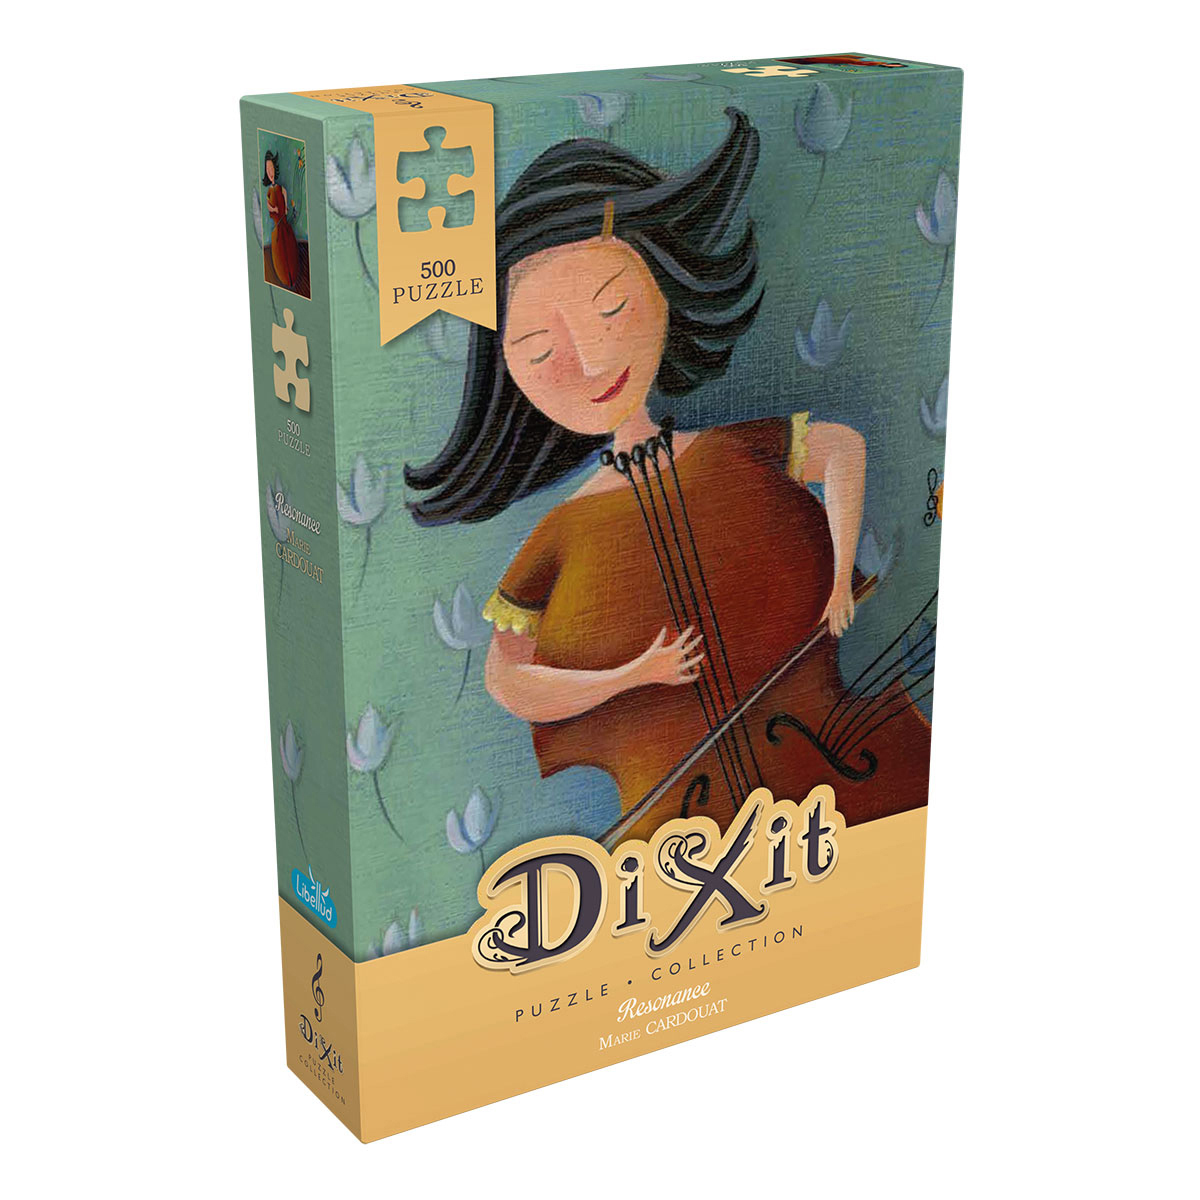 Mehrfarbig Teile) Dixit Puzzle Puzzle-Collection (500 Resonance LIBELLUD